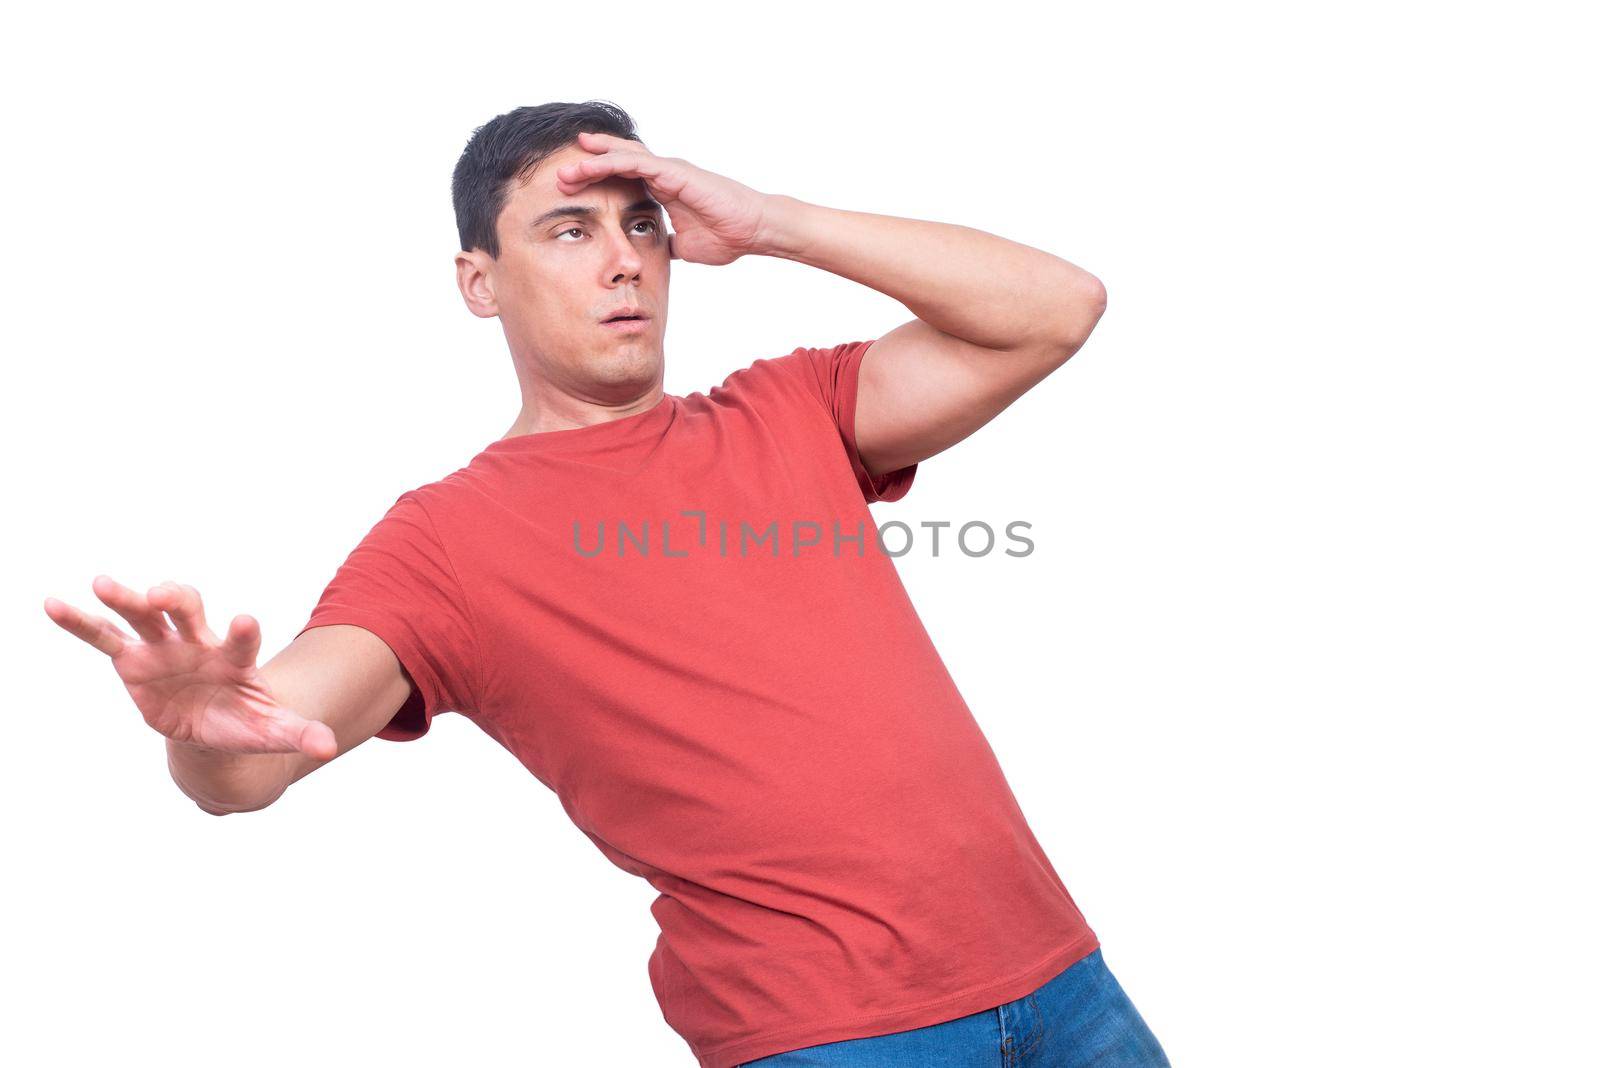 Guy in red t shirt touching forehead and waving arm during severe fainting against white background in studio